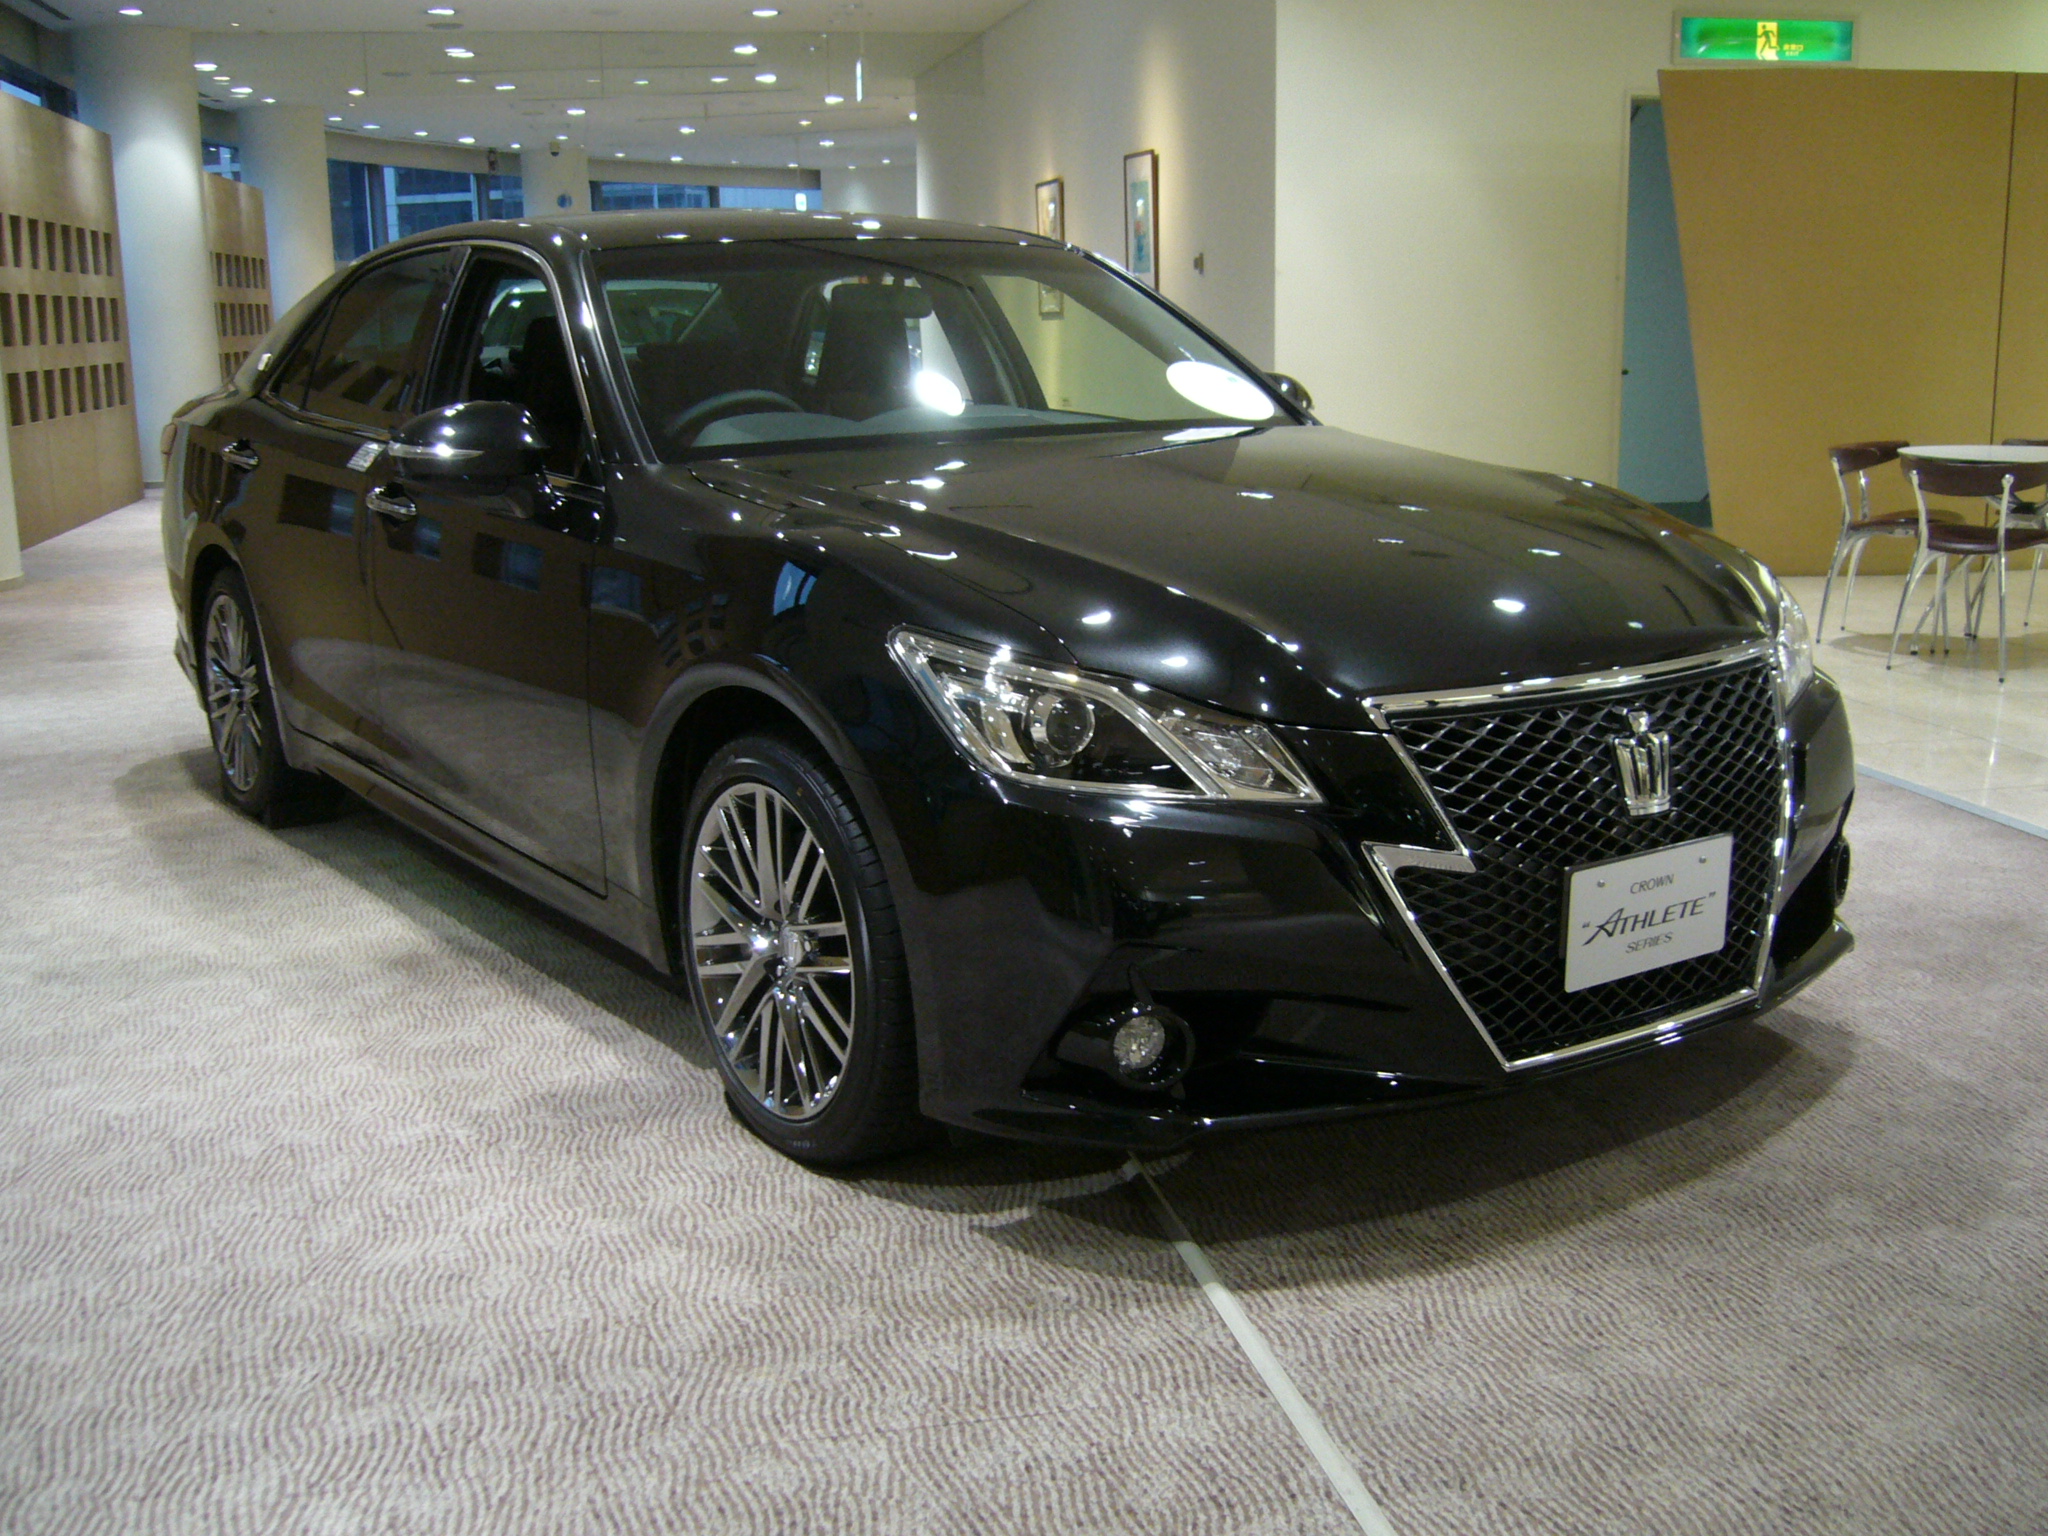 Toyota Crown Athlete 2014: Review, Amazing Pictures and Images – Look